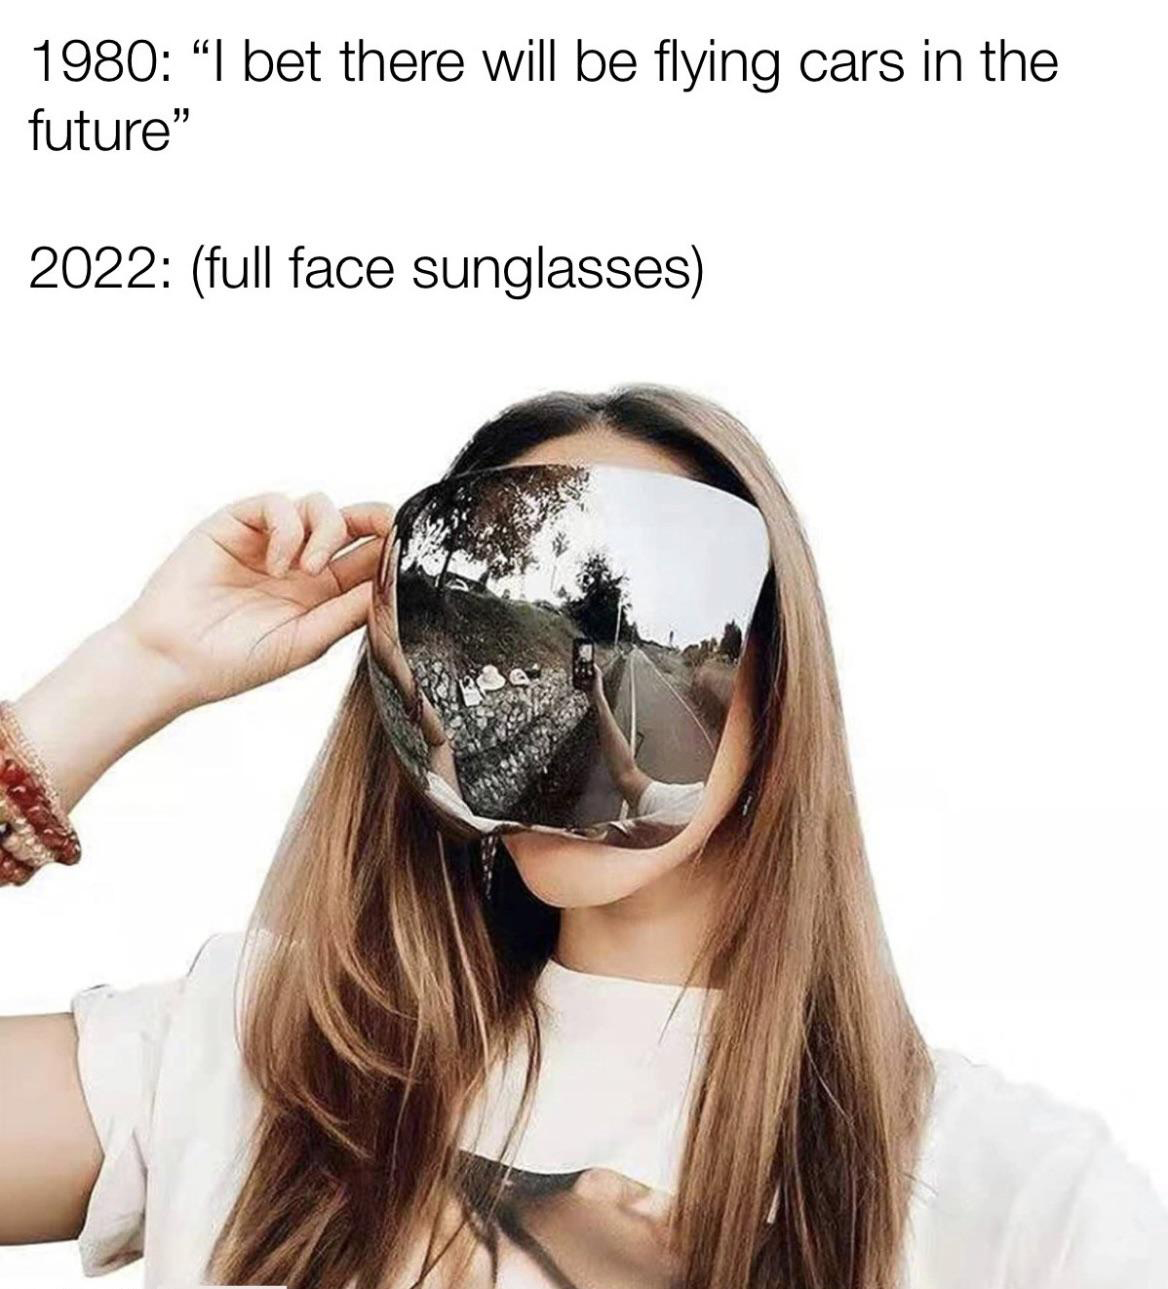 daily dose of memes - face shield sunglasses - 1980 "I bet there will be flying cars in the future" 2022 full face sunglasses